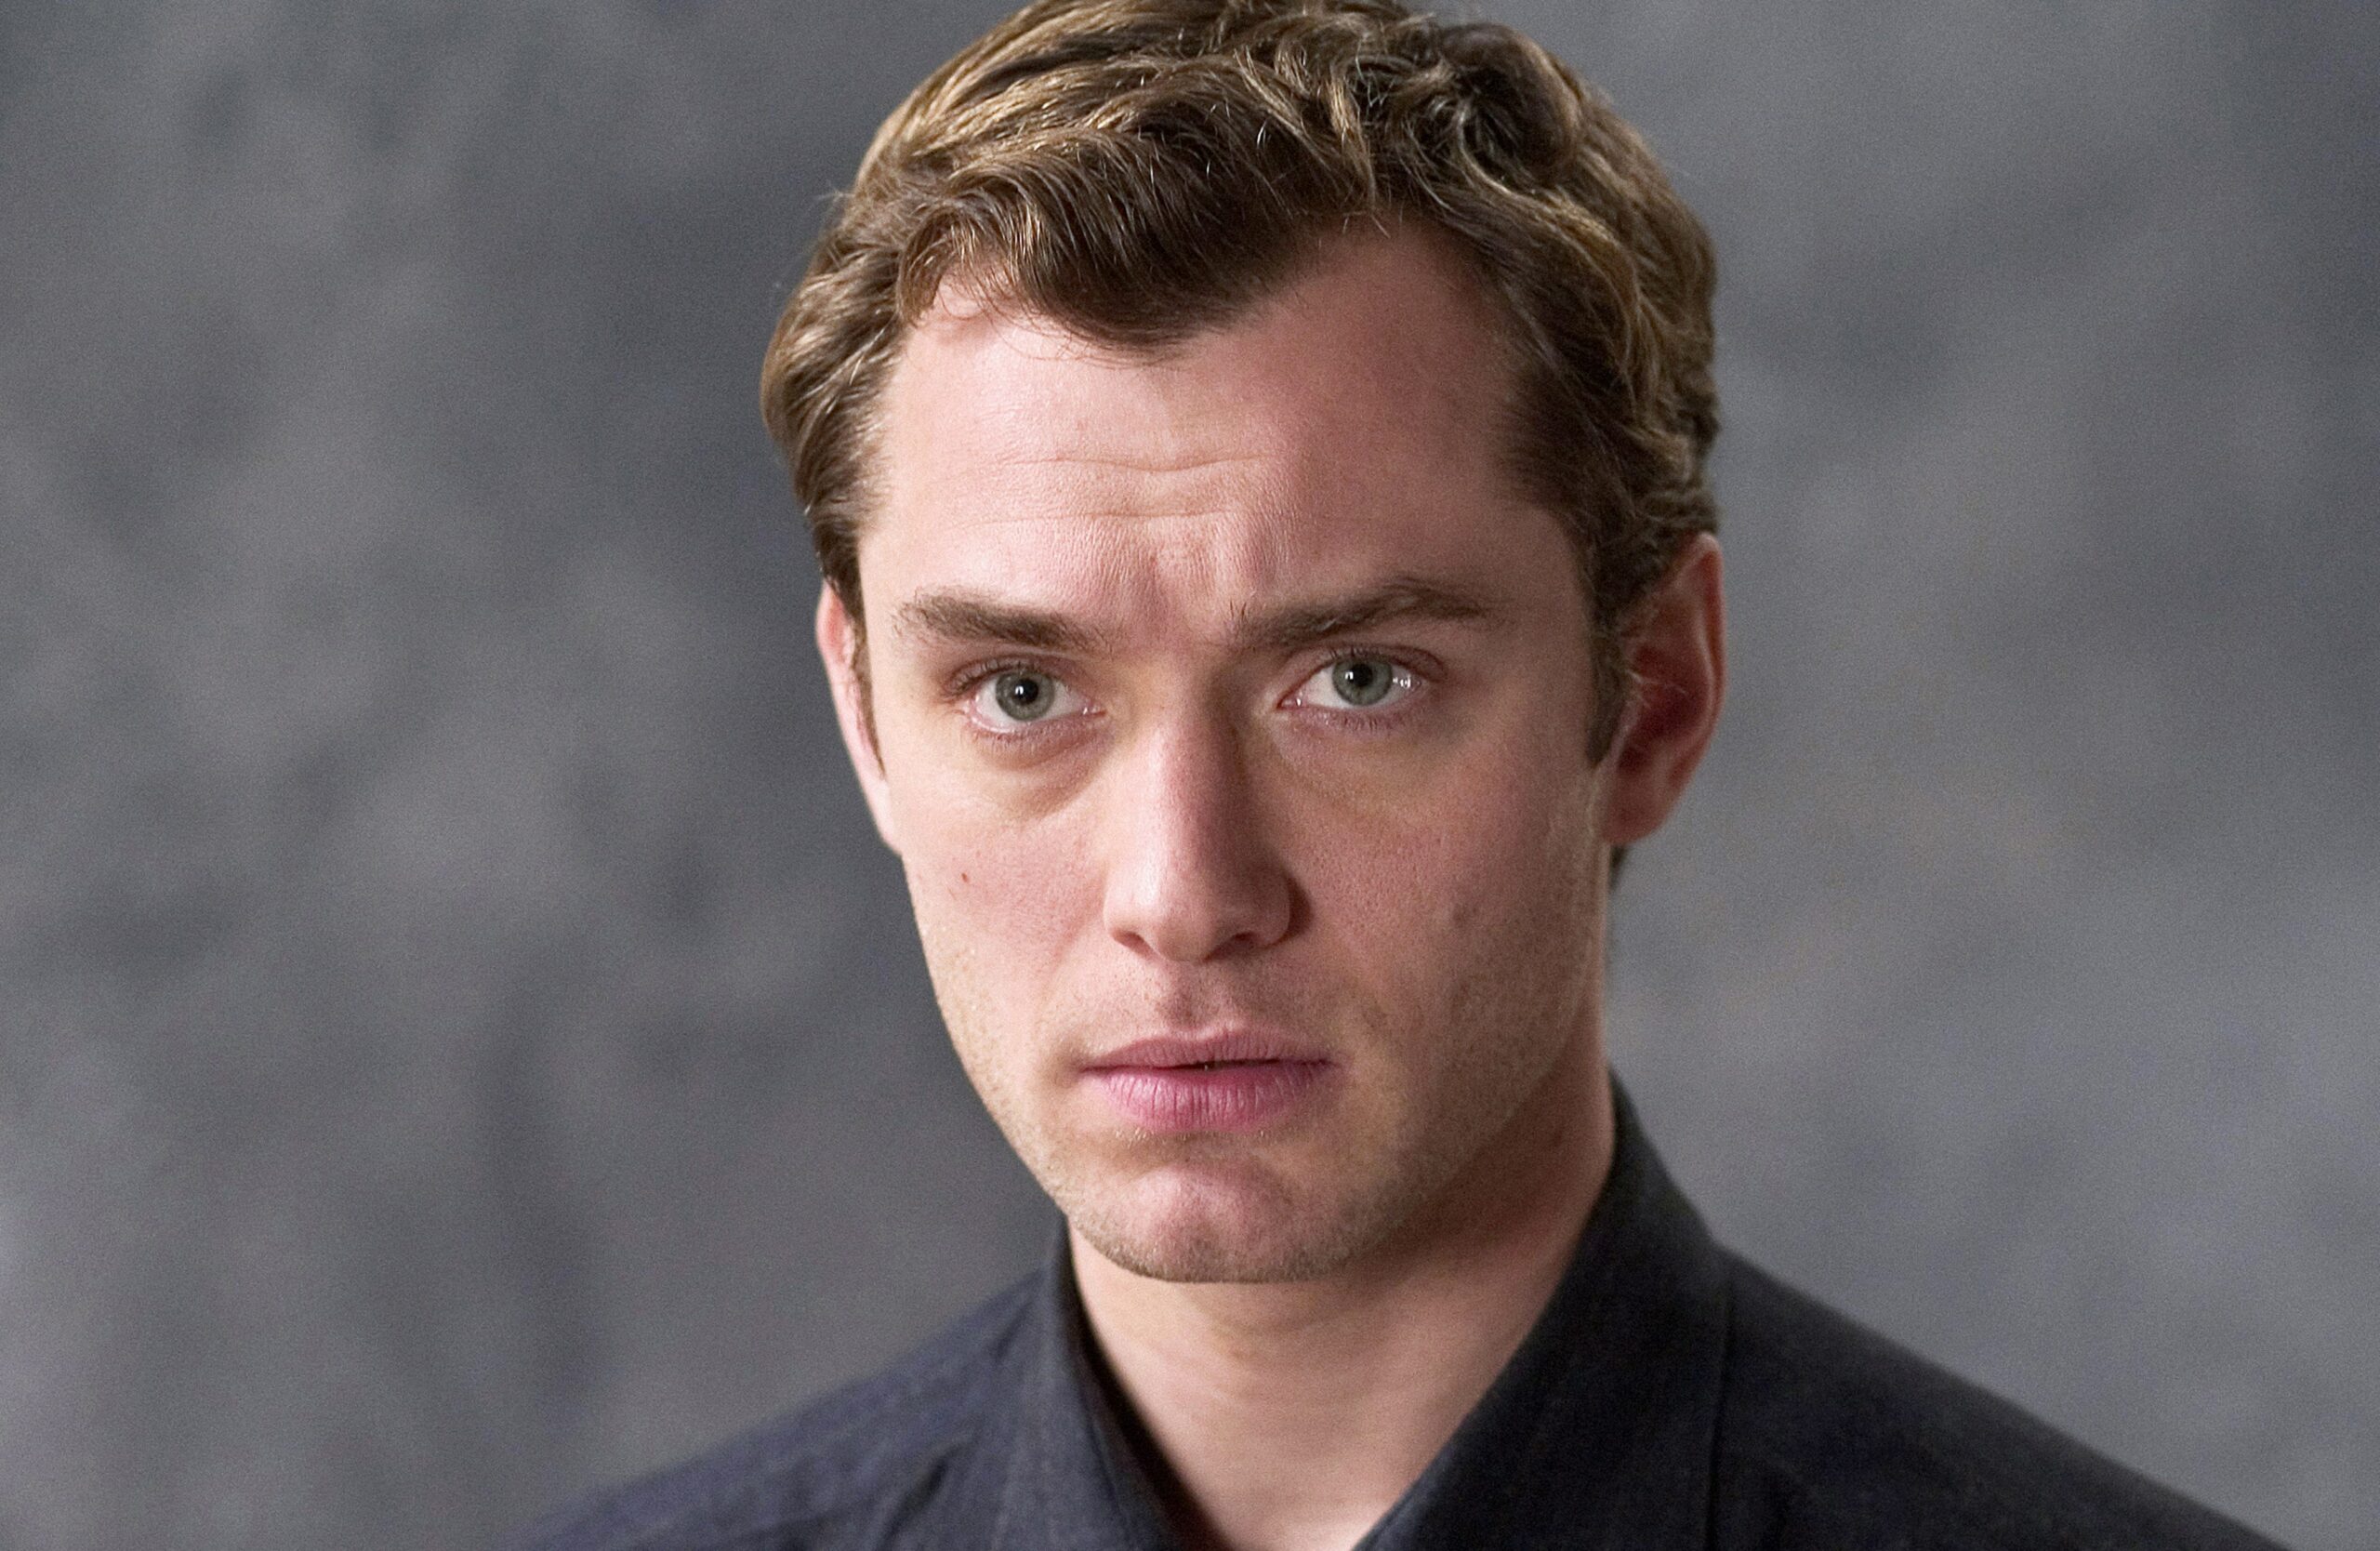 Jude Law (Actor) - Movies, Young, Height, Son, Net Worth